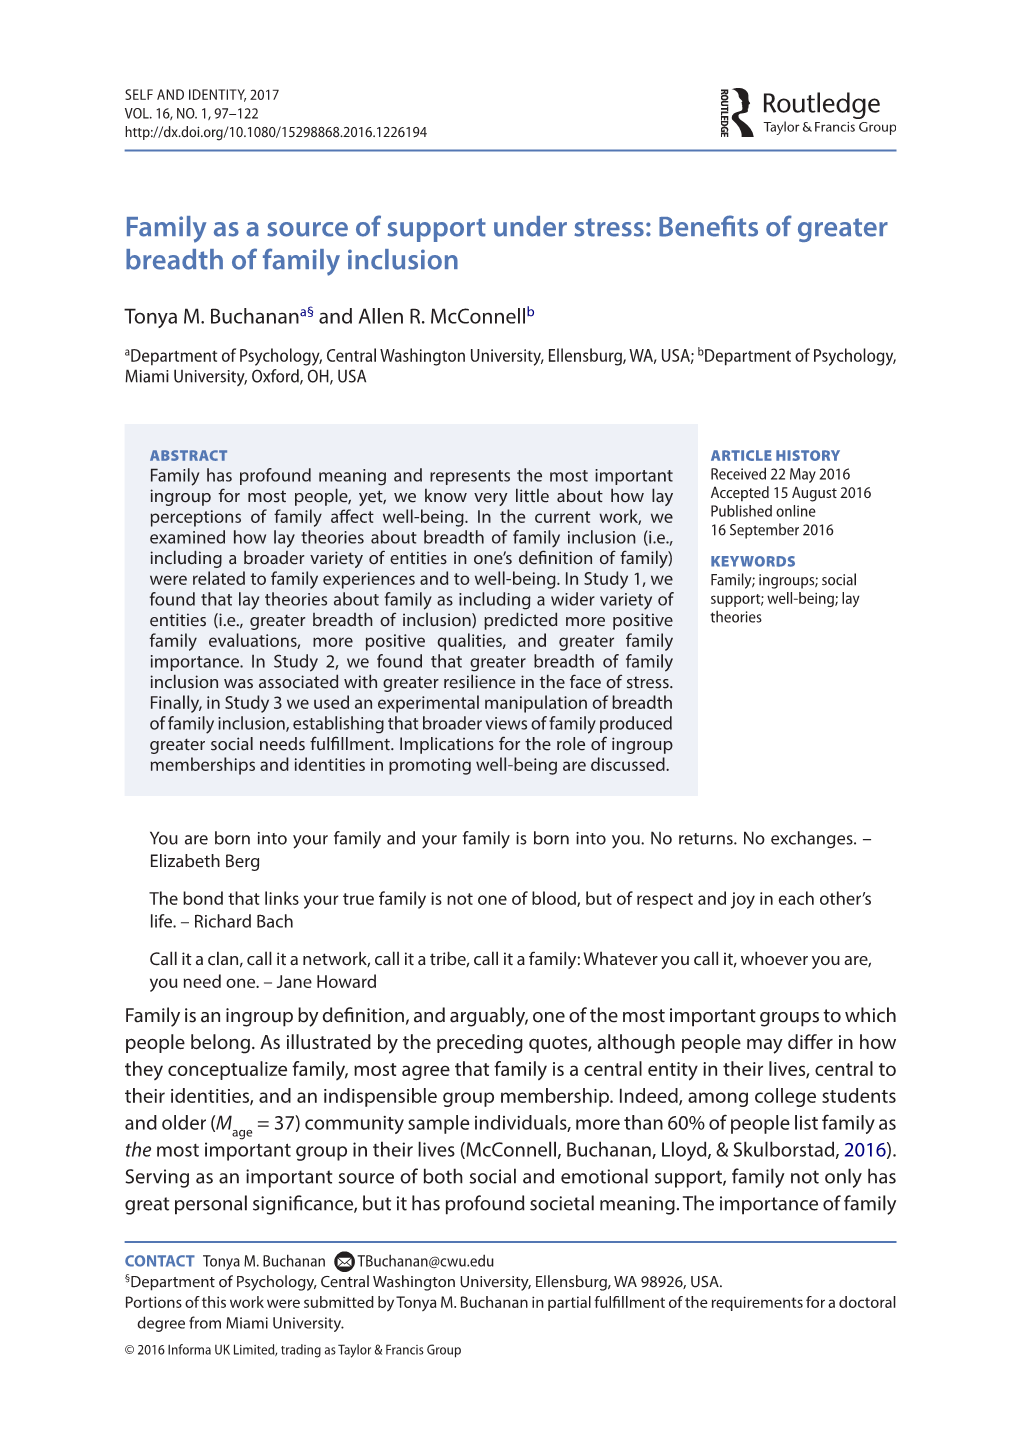 Family As a Source of Support Under Stress: Benefts of Greater Breadth of Family Inclusion